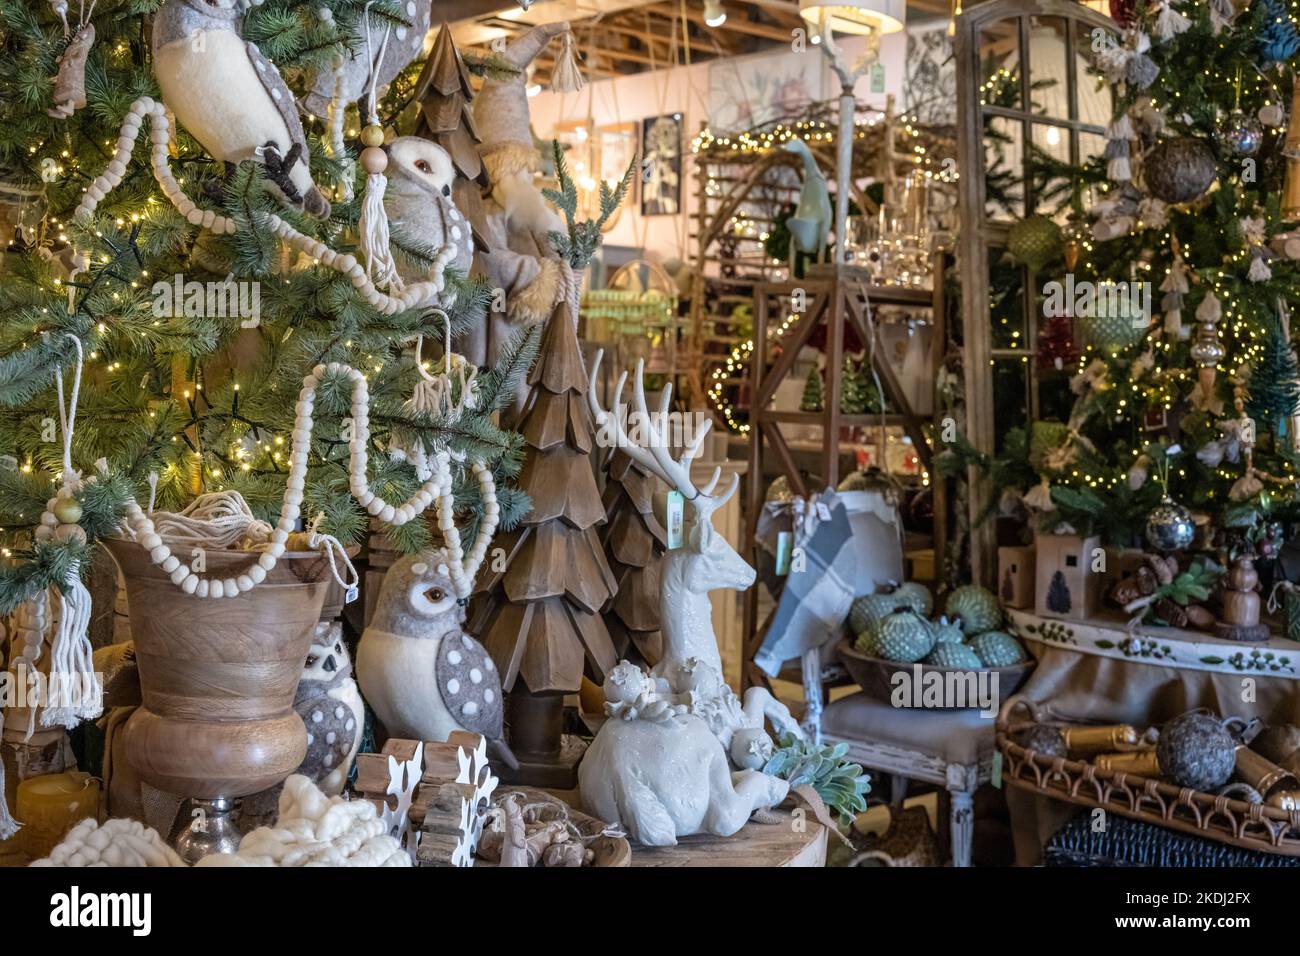 Christmas decor display at Dutchmans upscale casual living store on Main Street in Highlands, North Carolina. (USA) Stock Photo